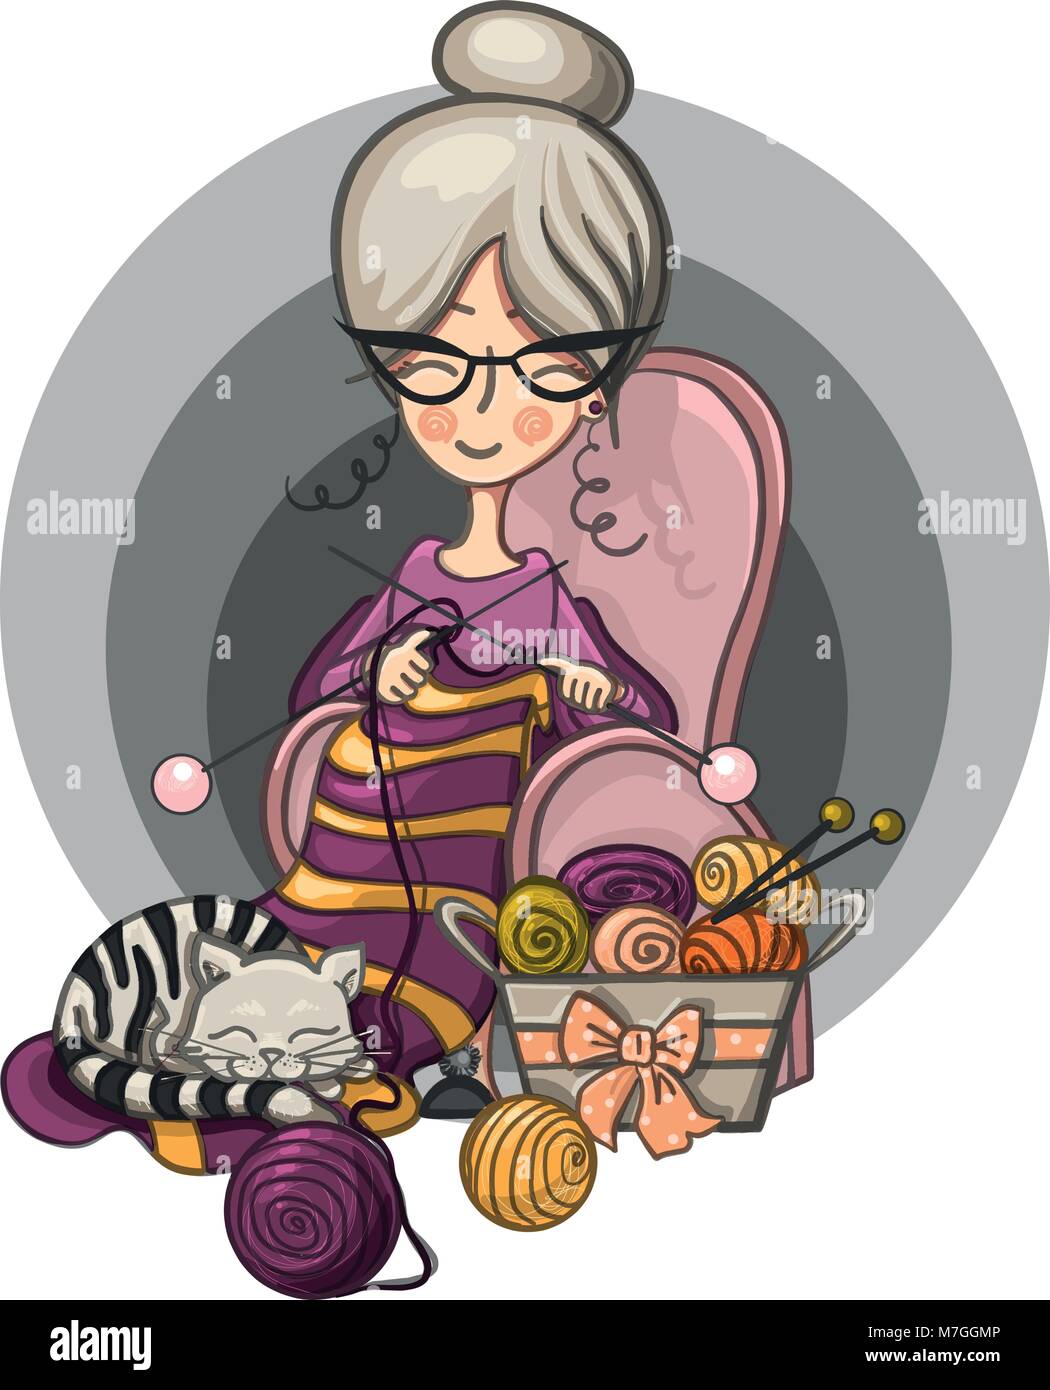 woman Granny sits in a Chair and knits knitting needles striped, cat sleeps on her knitting around the scattered balls, cartoon cute smiling character Stock Vector